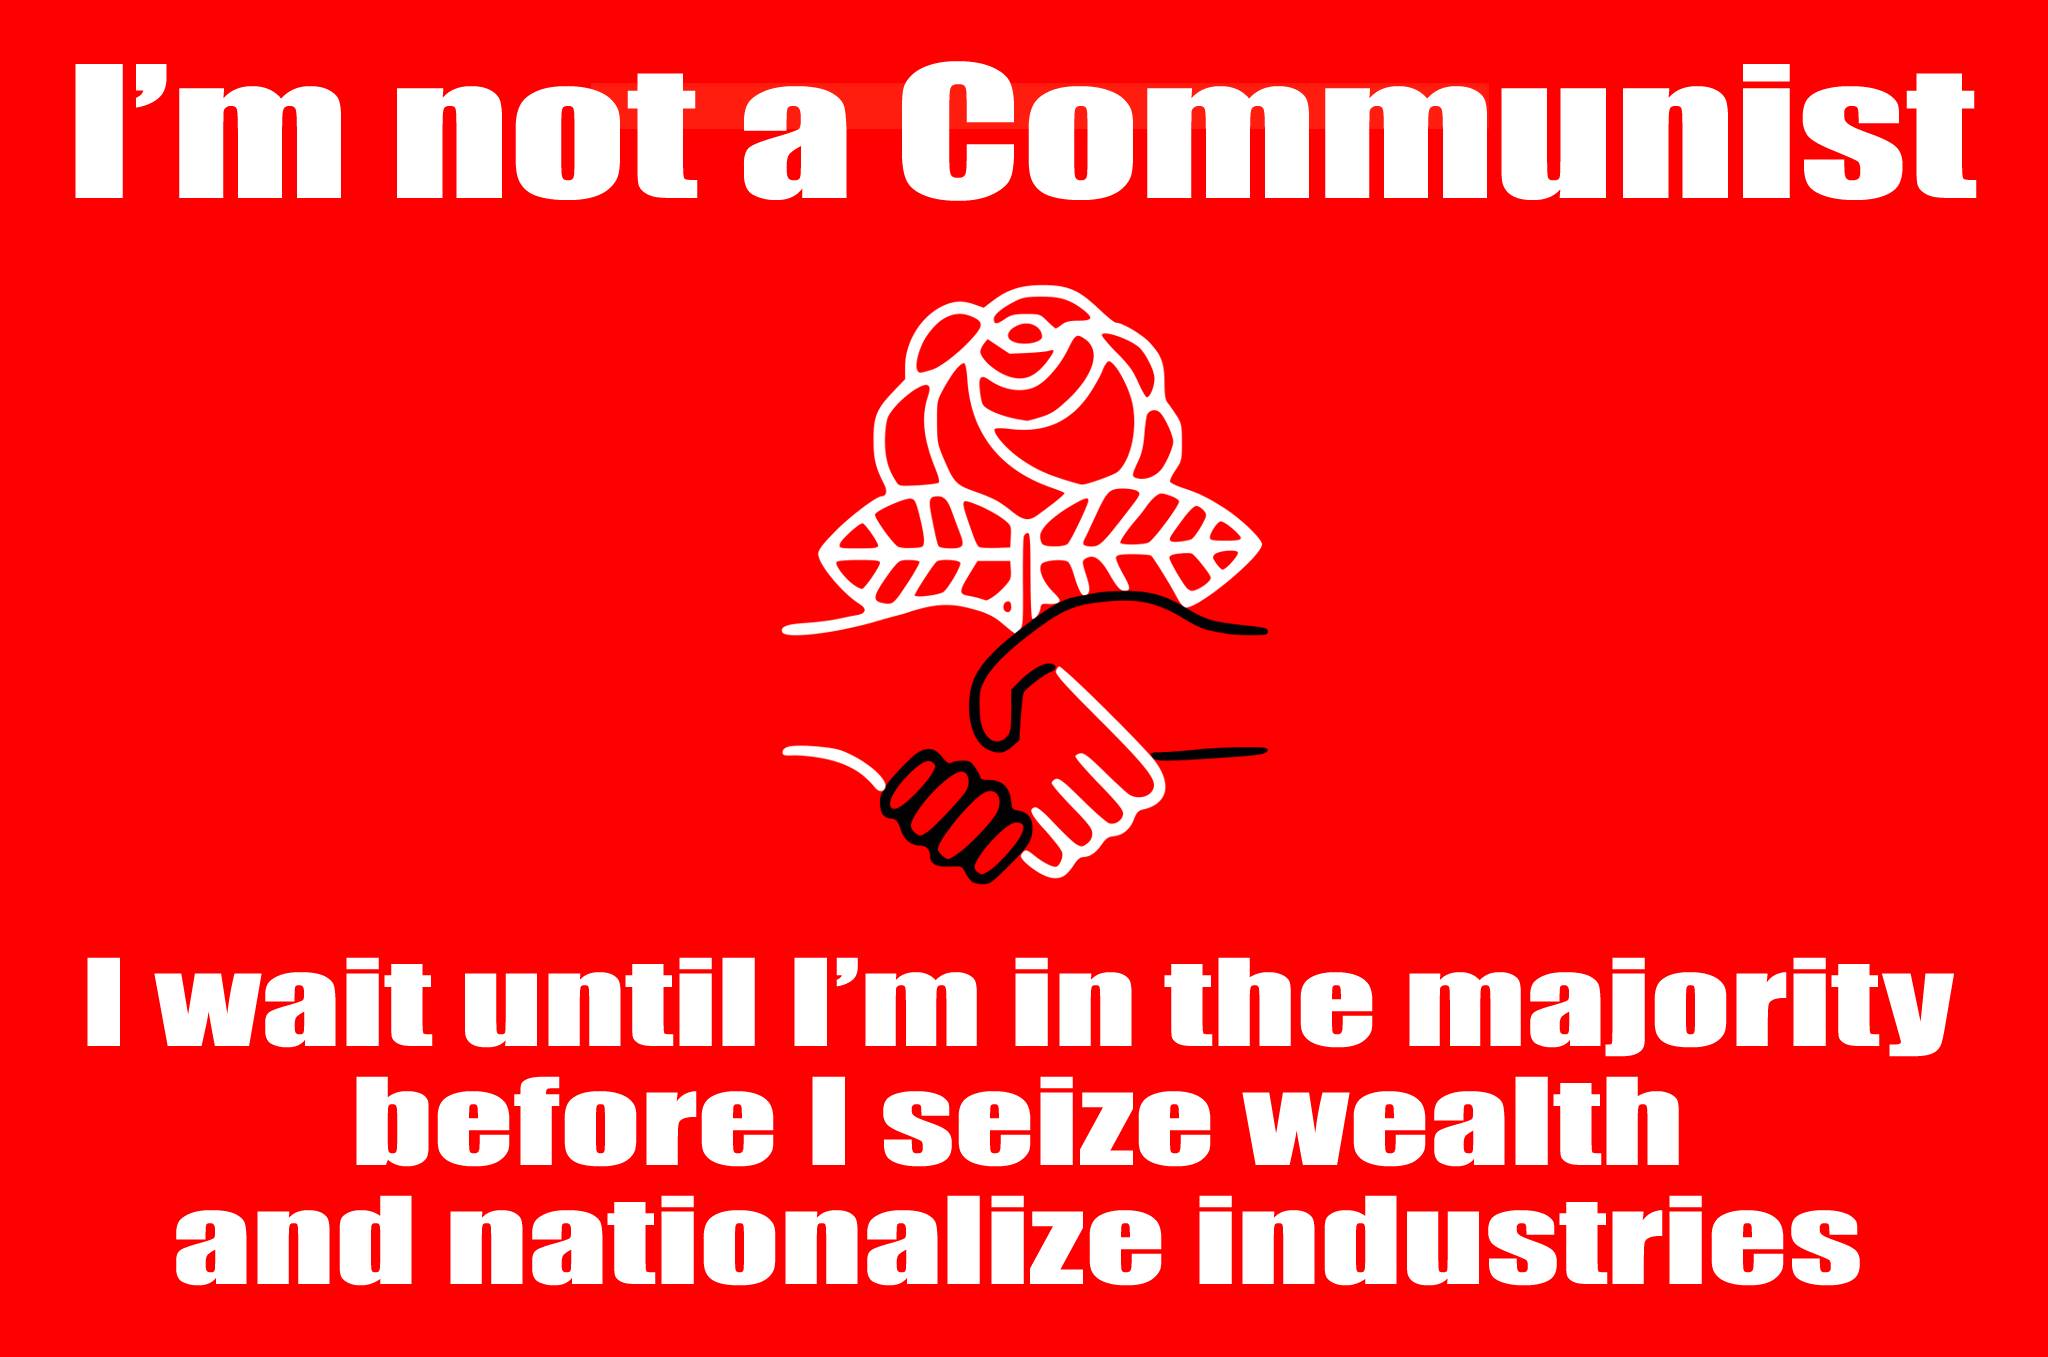 Democratic Socialists of America are not Communists